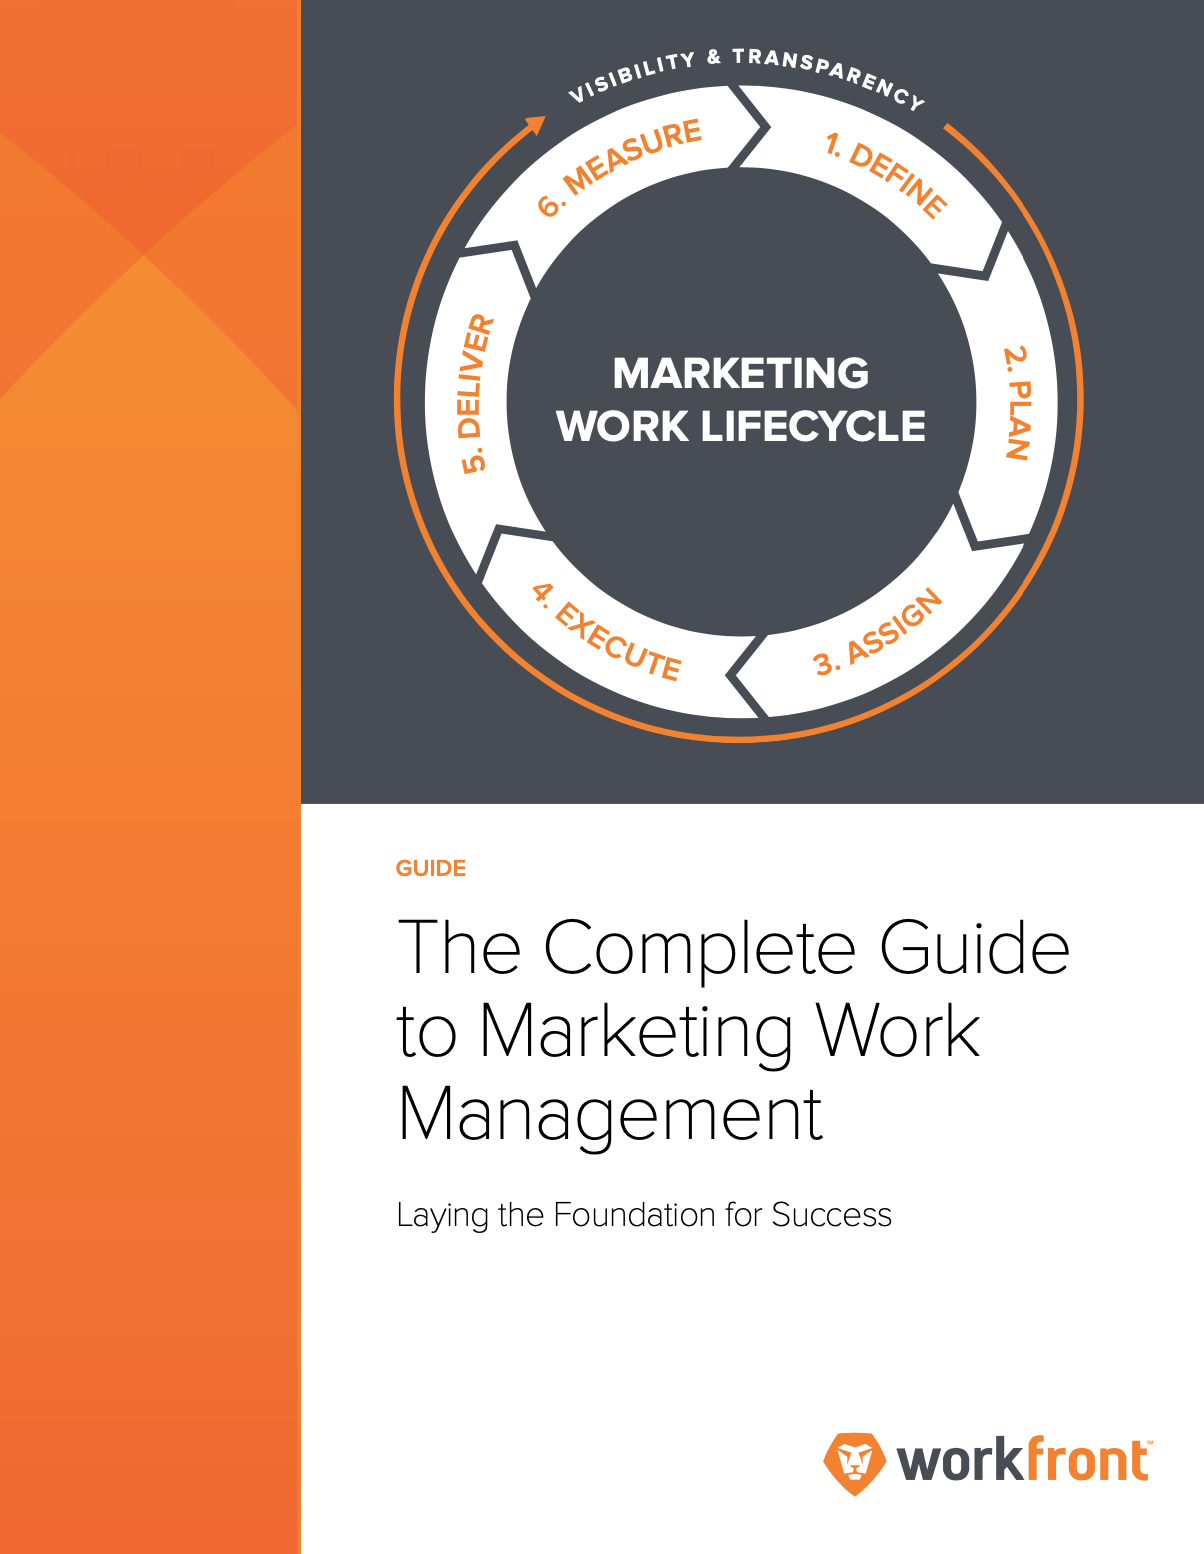 The Complete Guide to Marketing Work Management